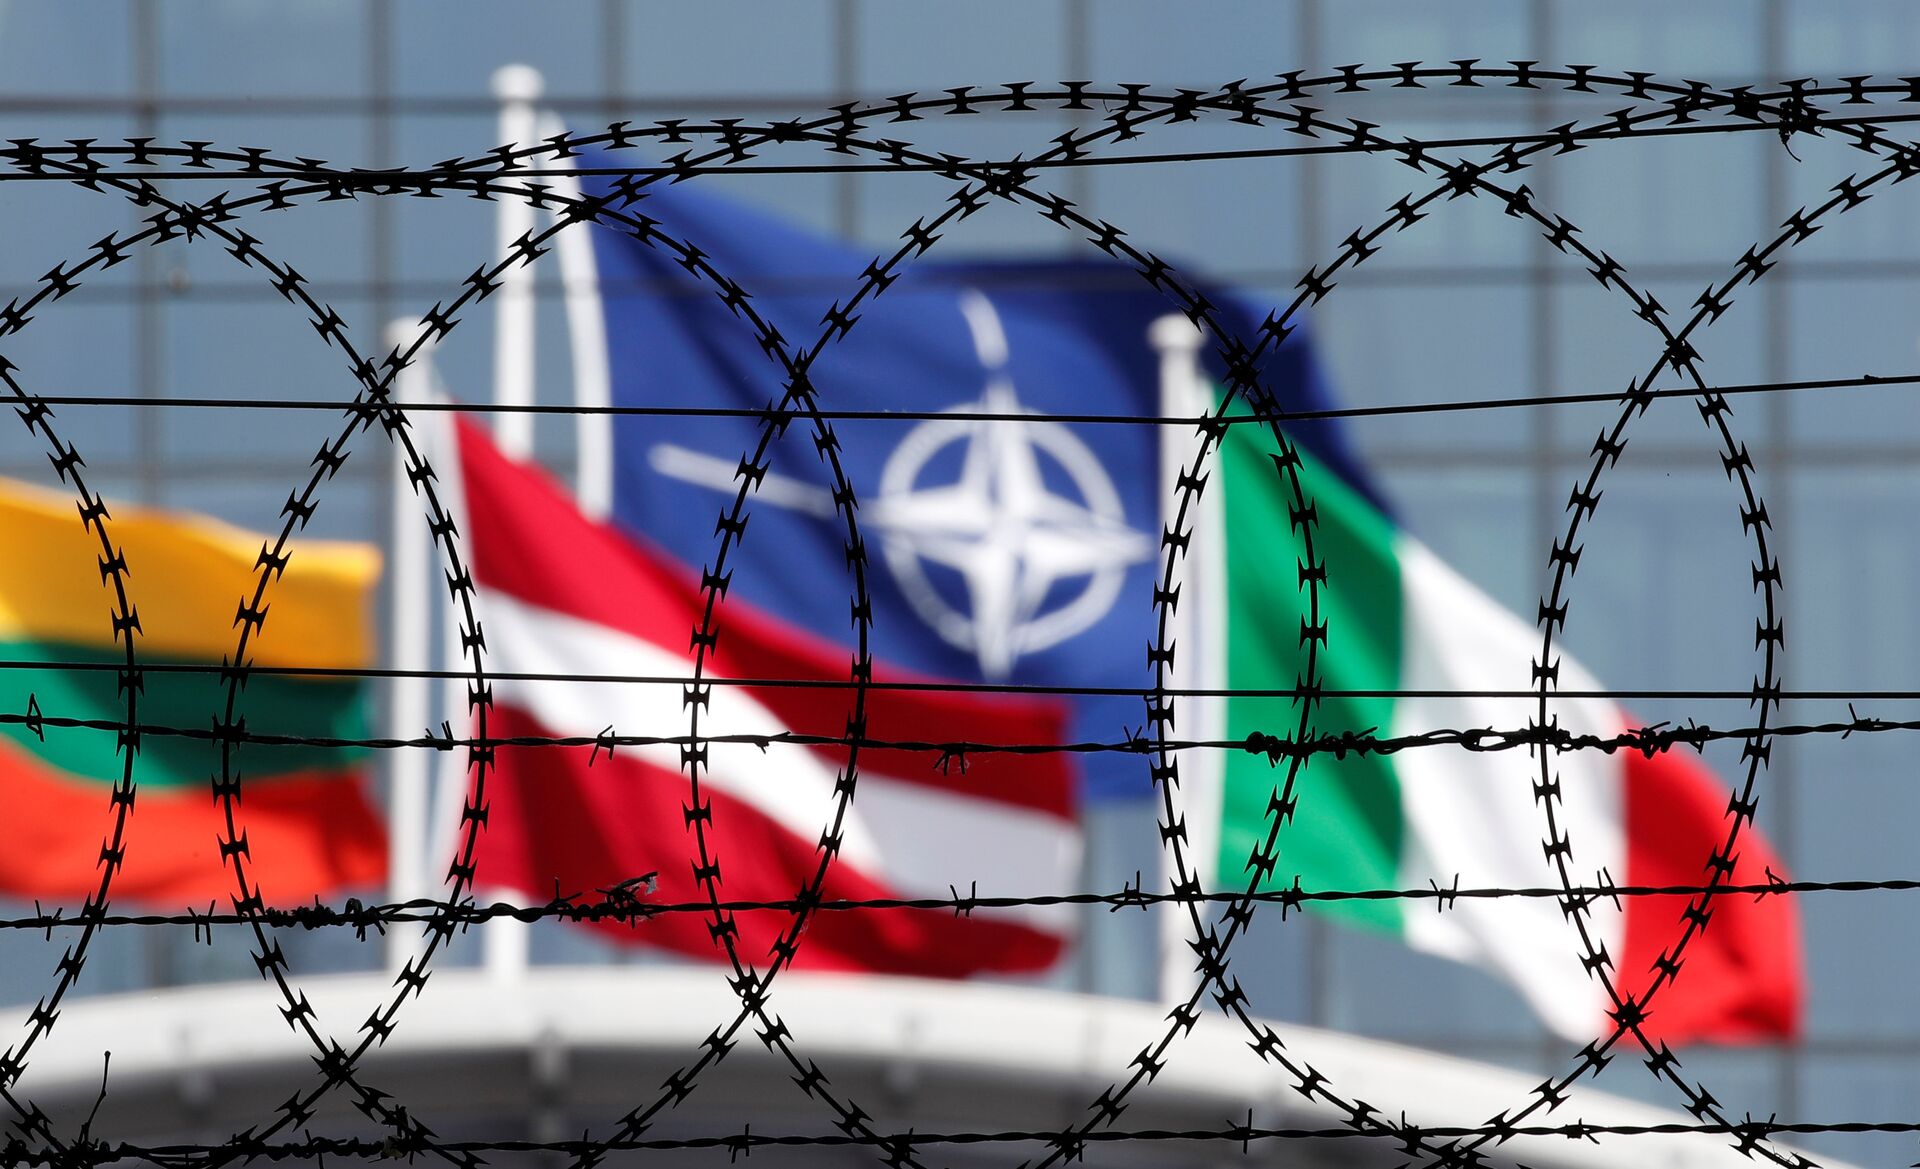 The NATO flag is seen through barbed wire as it flies in front of the new NATO Headquarters in Brussels, Belgium May 24, 2017 - Sputnik International, 1920, 13.11.2021